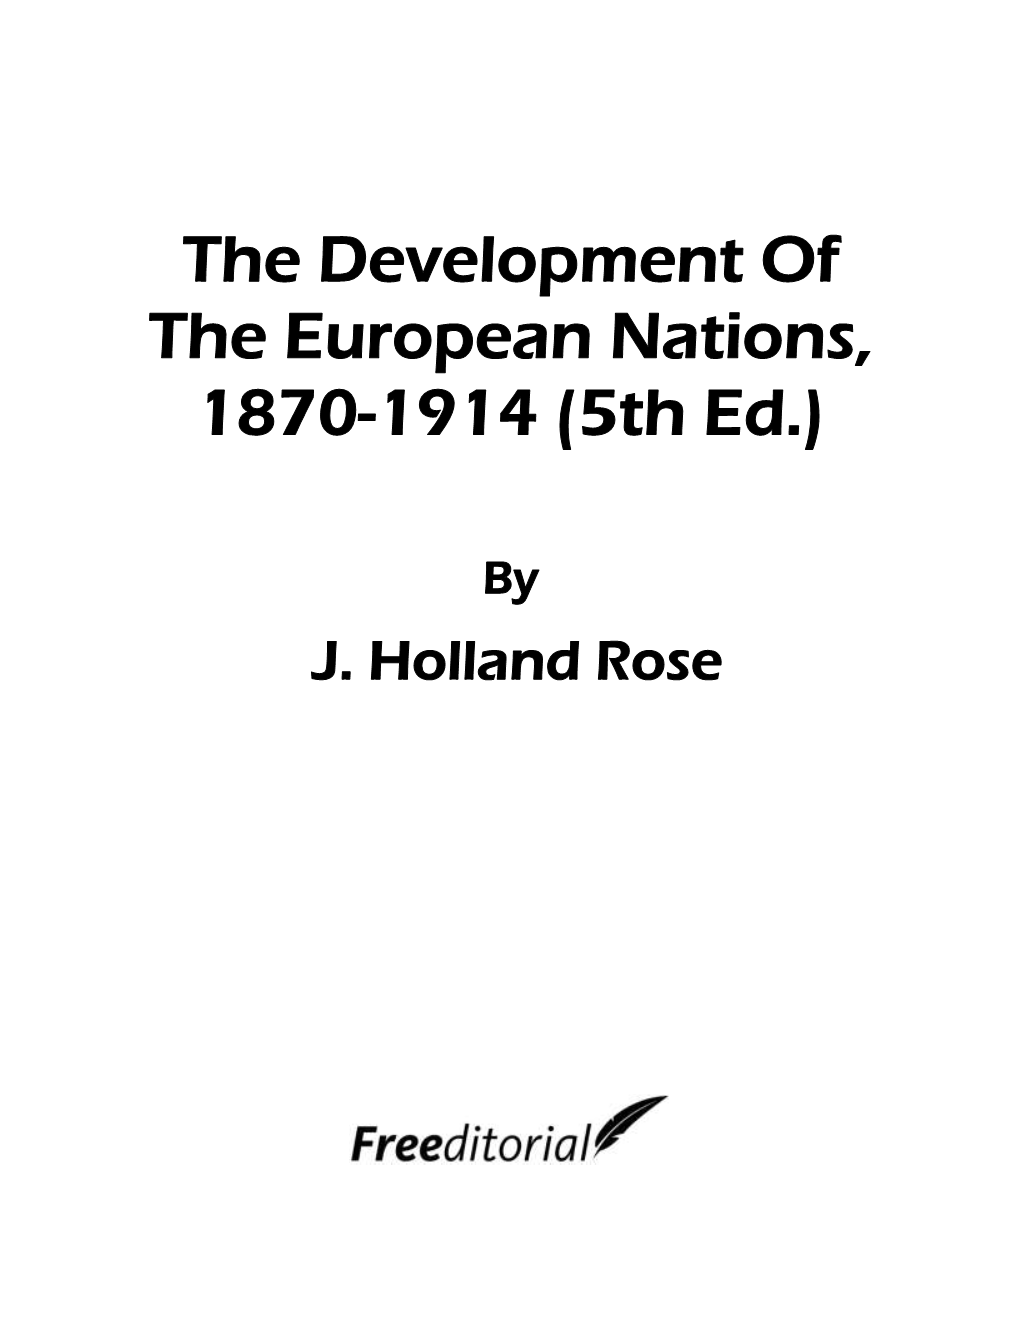 The Development of the European Nations, 1870-1914 (5Th Ed.)